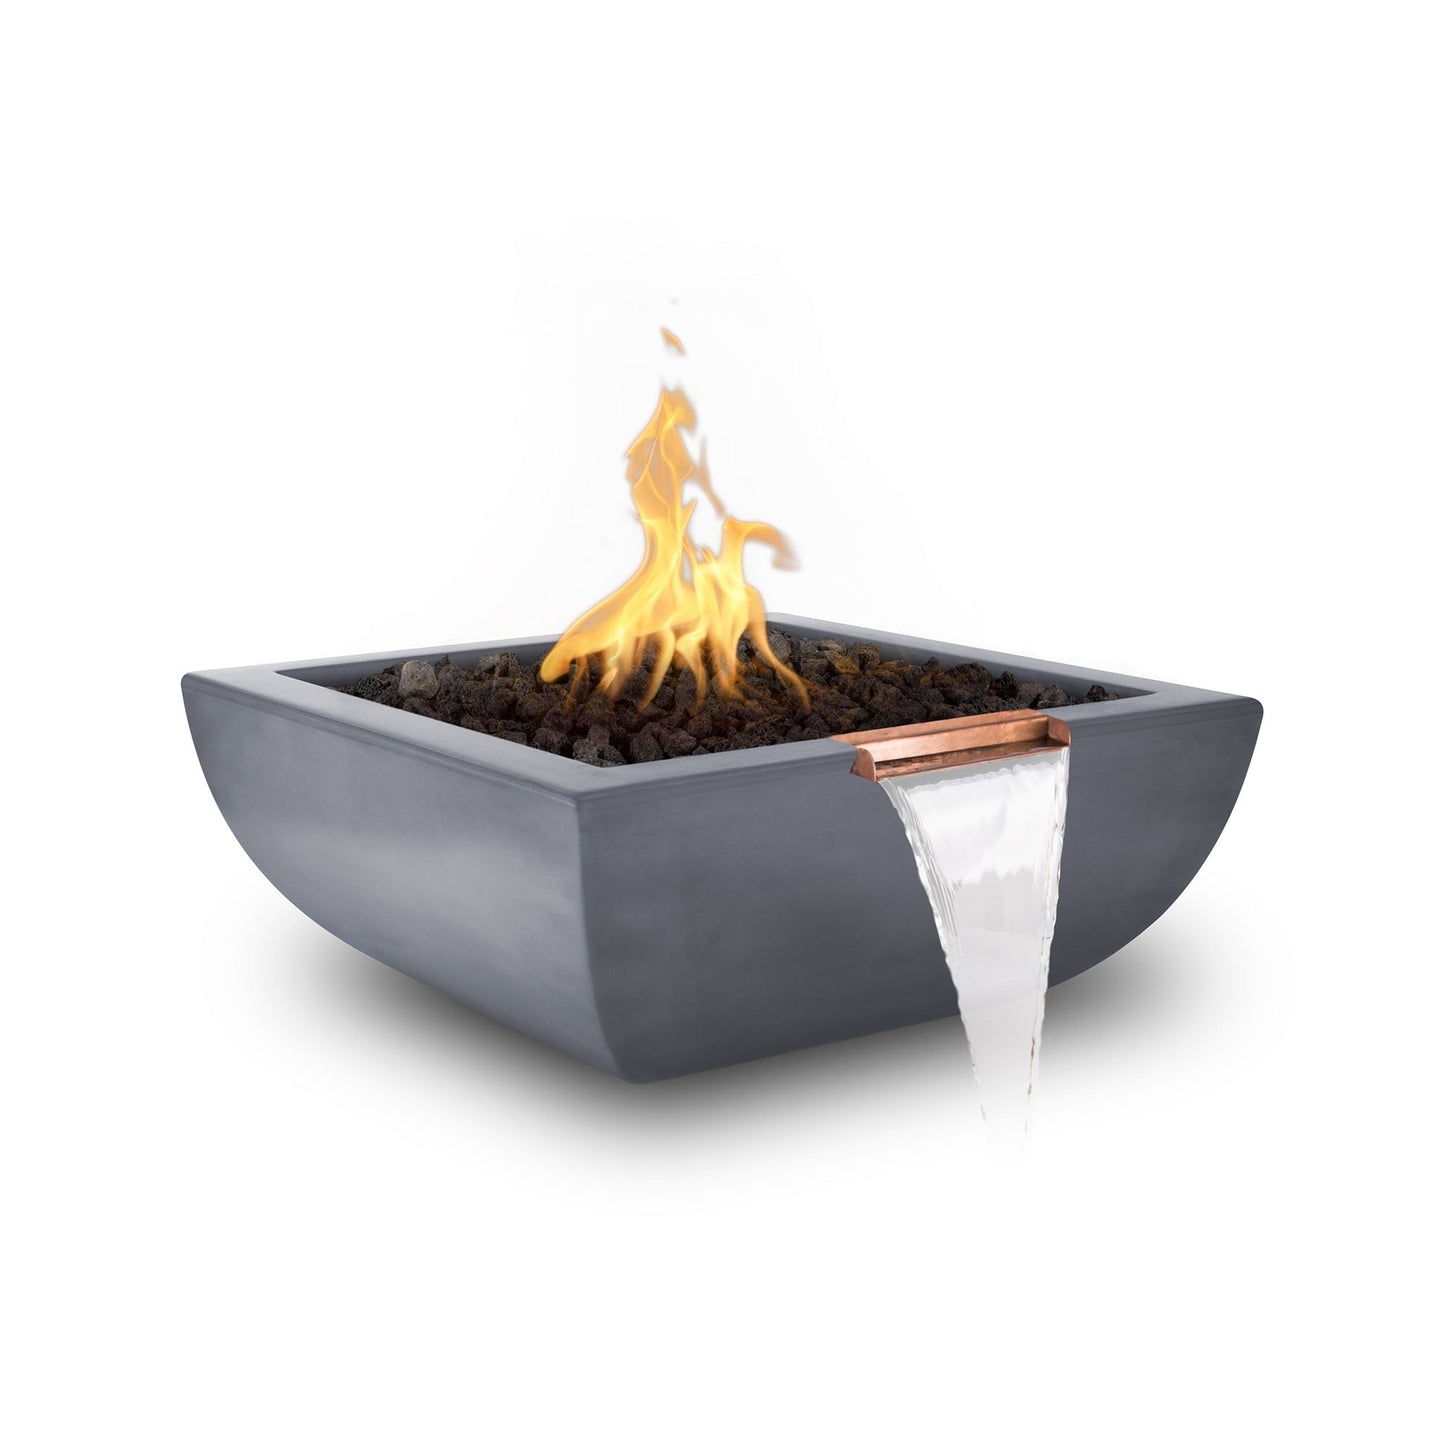 The Outdoor Plus Square Avalon 24" Black GFRC Concrete Liquid Propane Fire & Water Bowl with Match Lit with Flame Sense Ignition